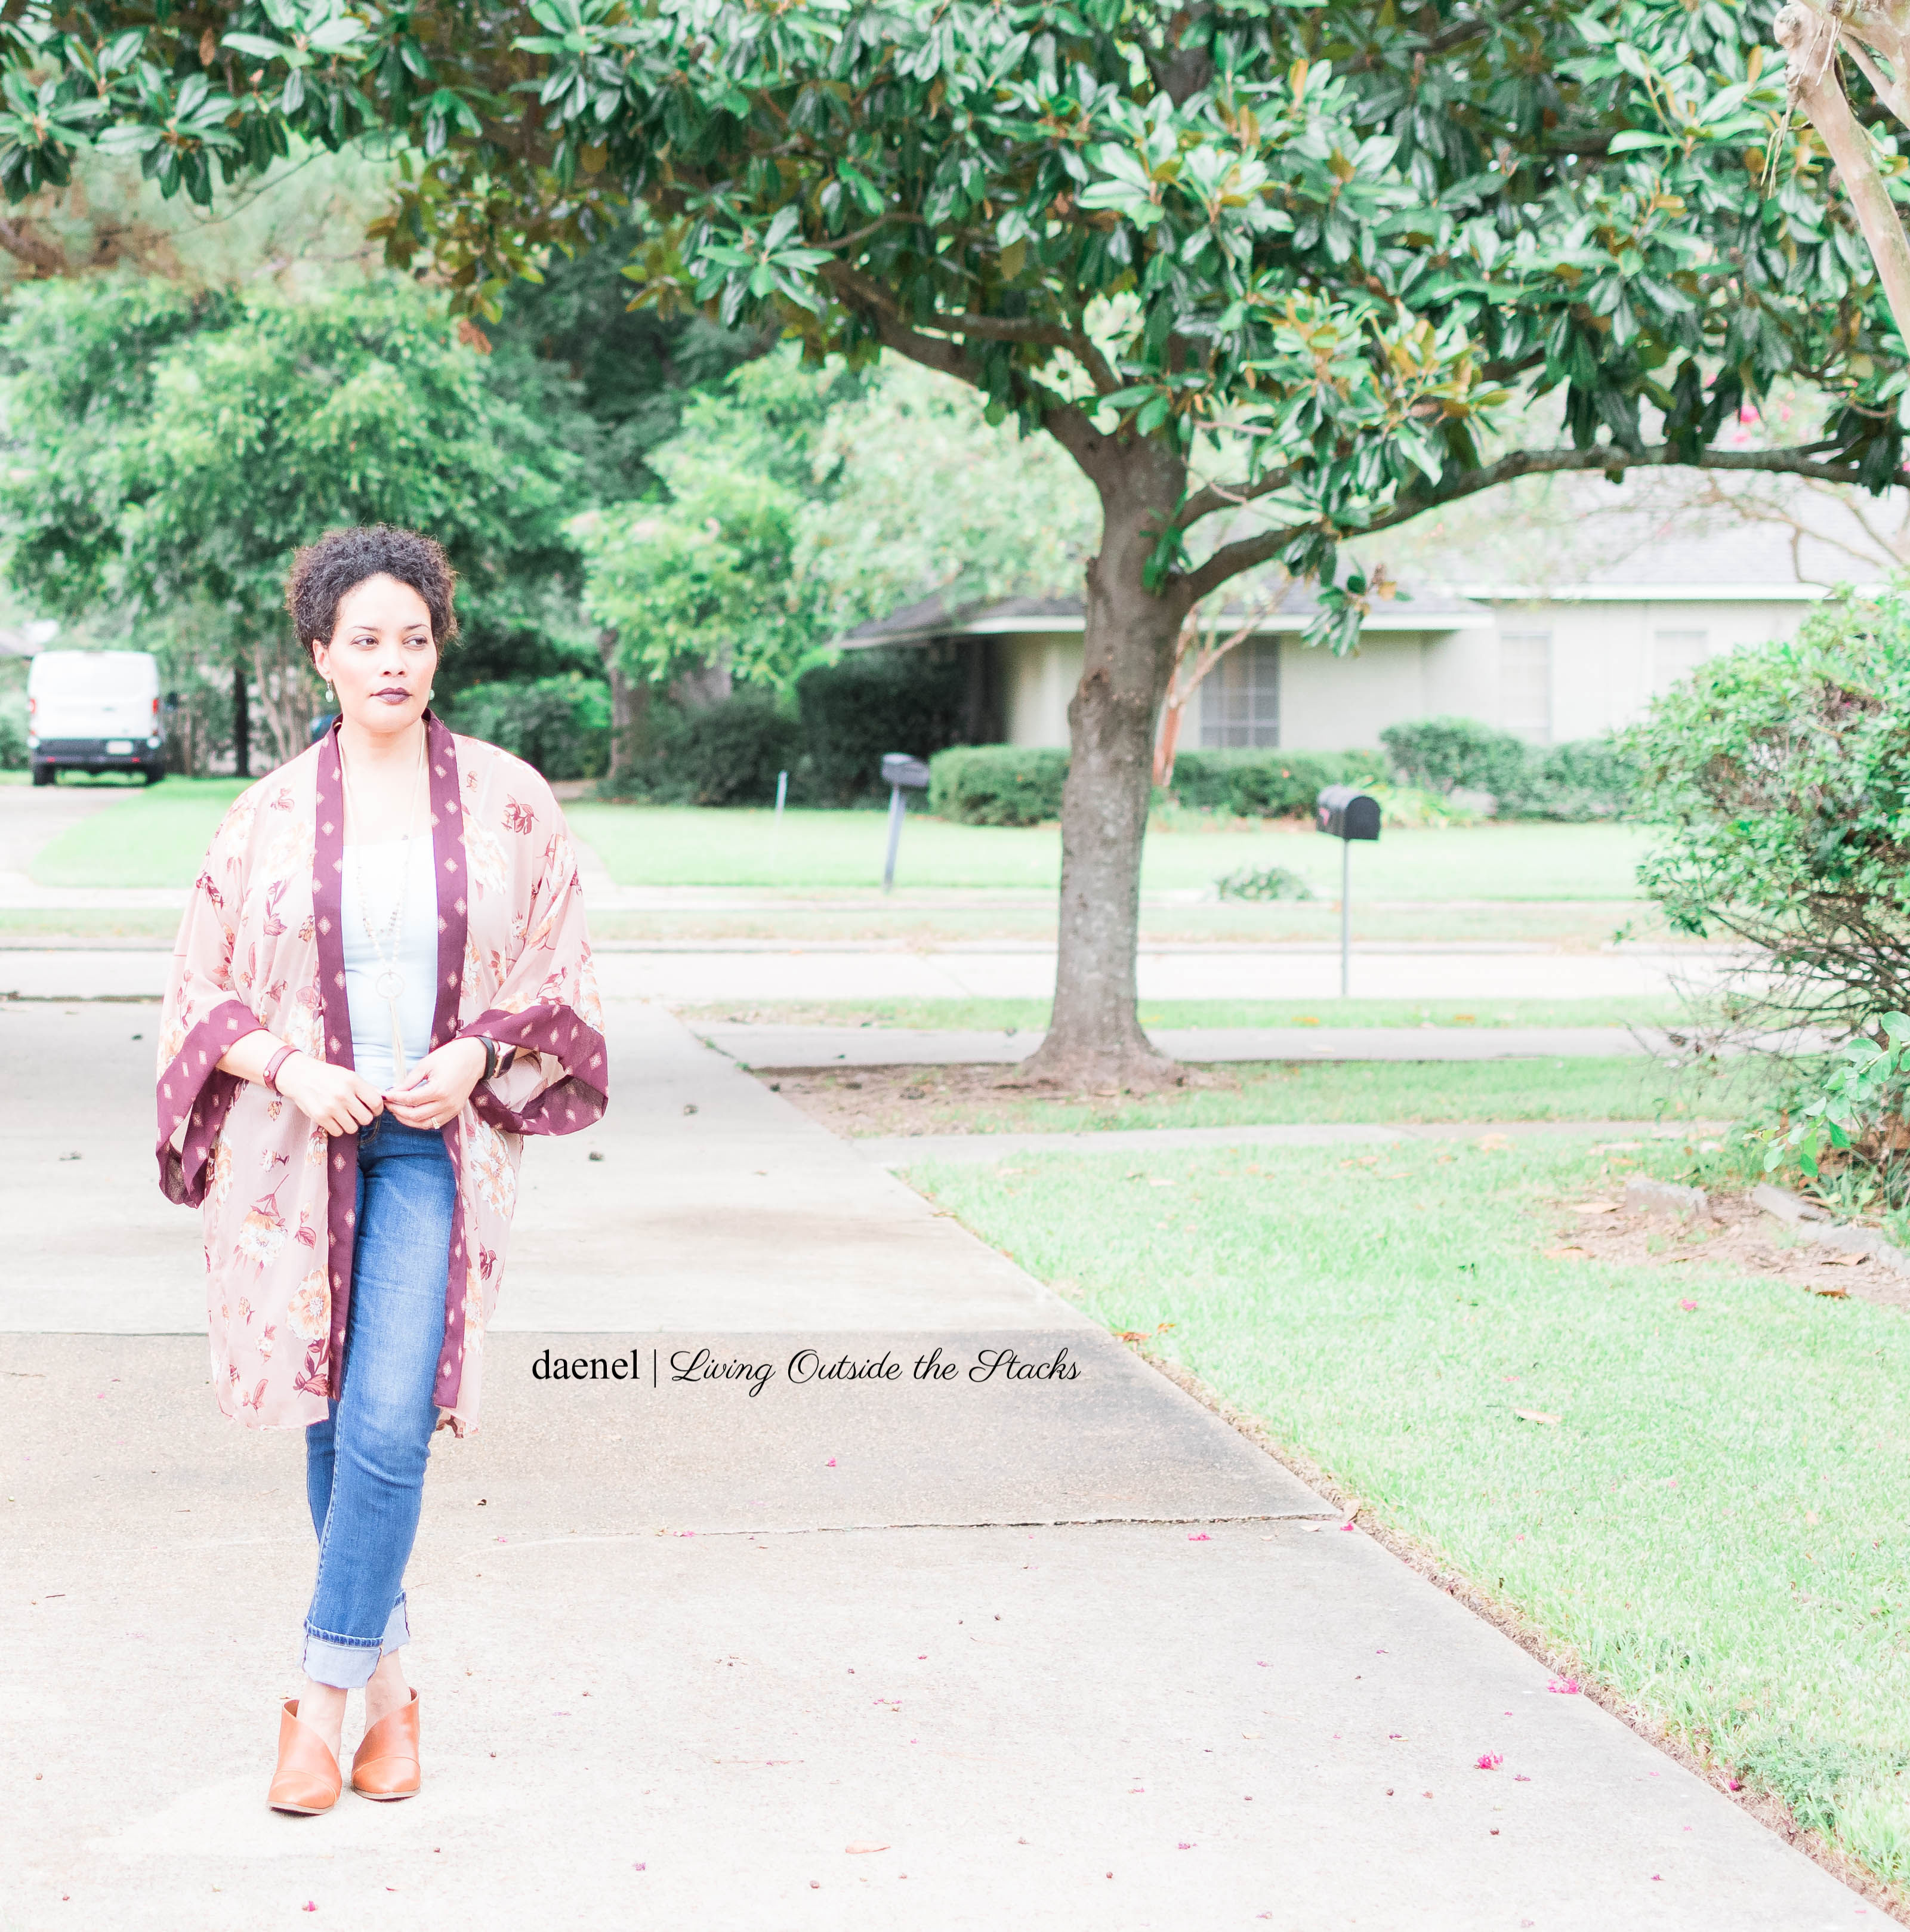 Kimono Turquoise Tank Jeans and Brown Shoes for Style Imitating Art {living outside the stacks}